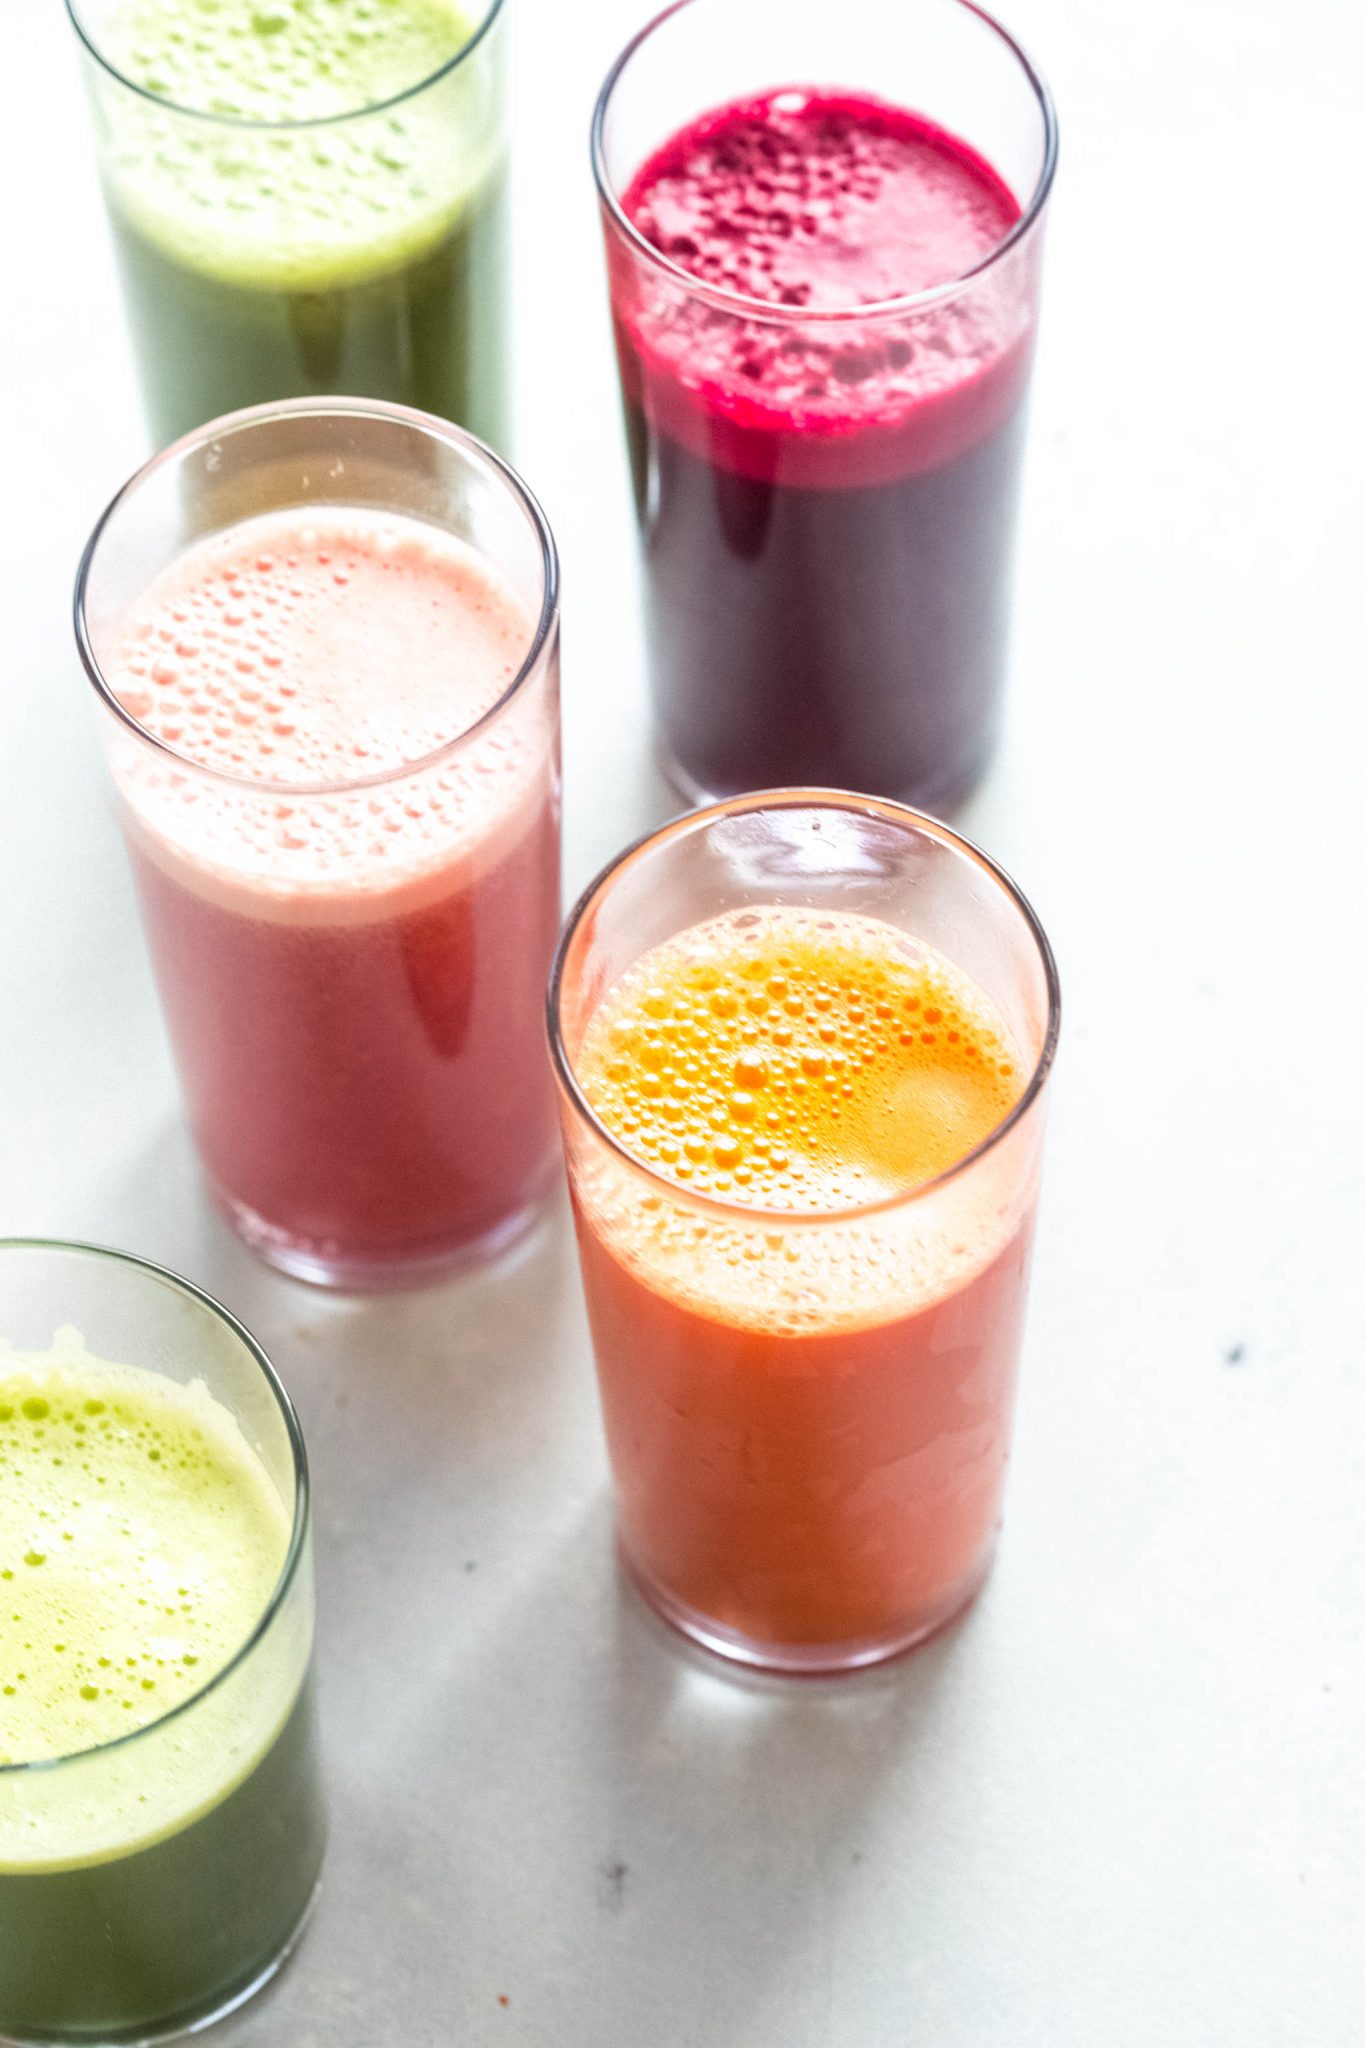 These 7 Healthy Juicing Recipes will help boost your energy, detox your body and aid with weight loss. 